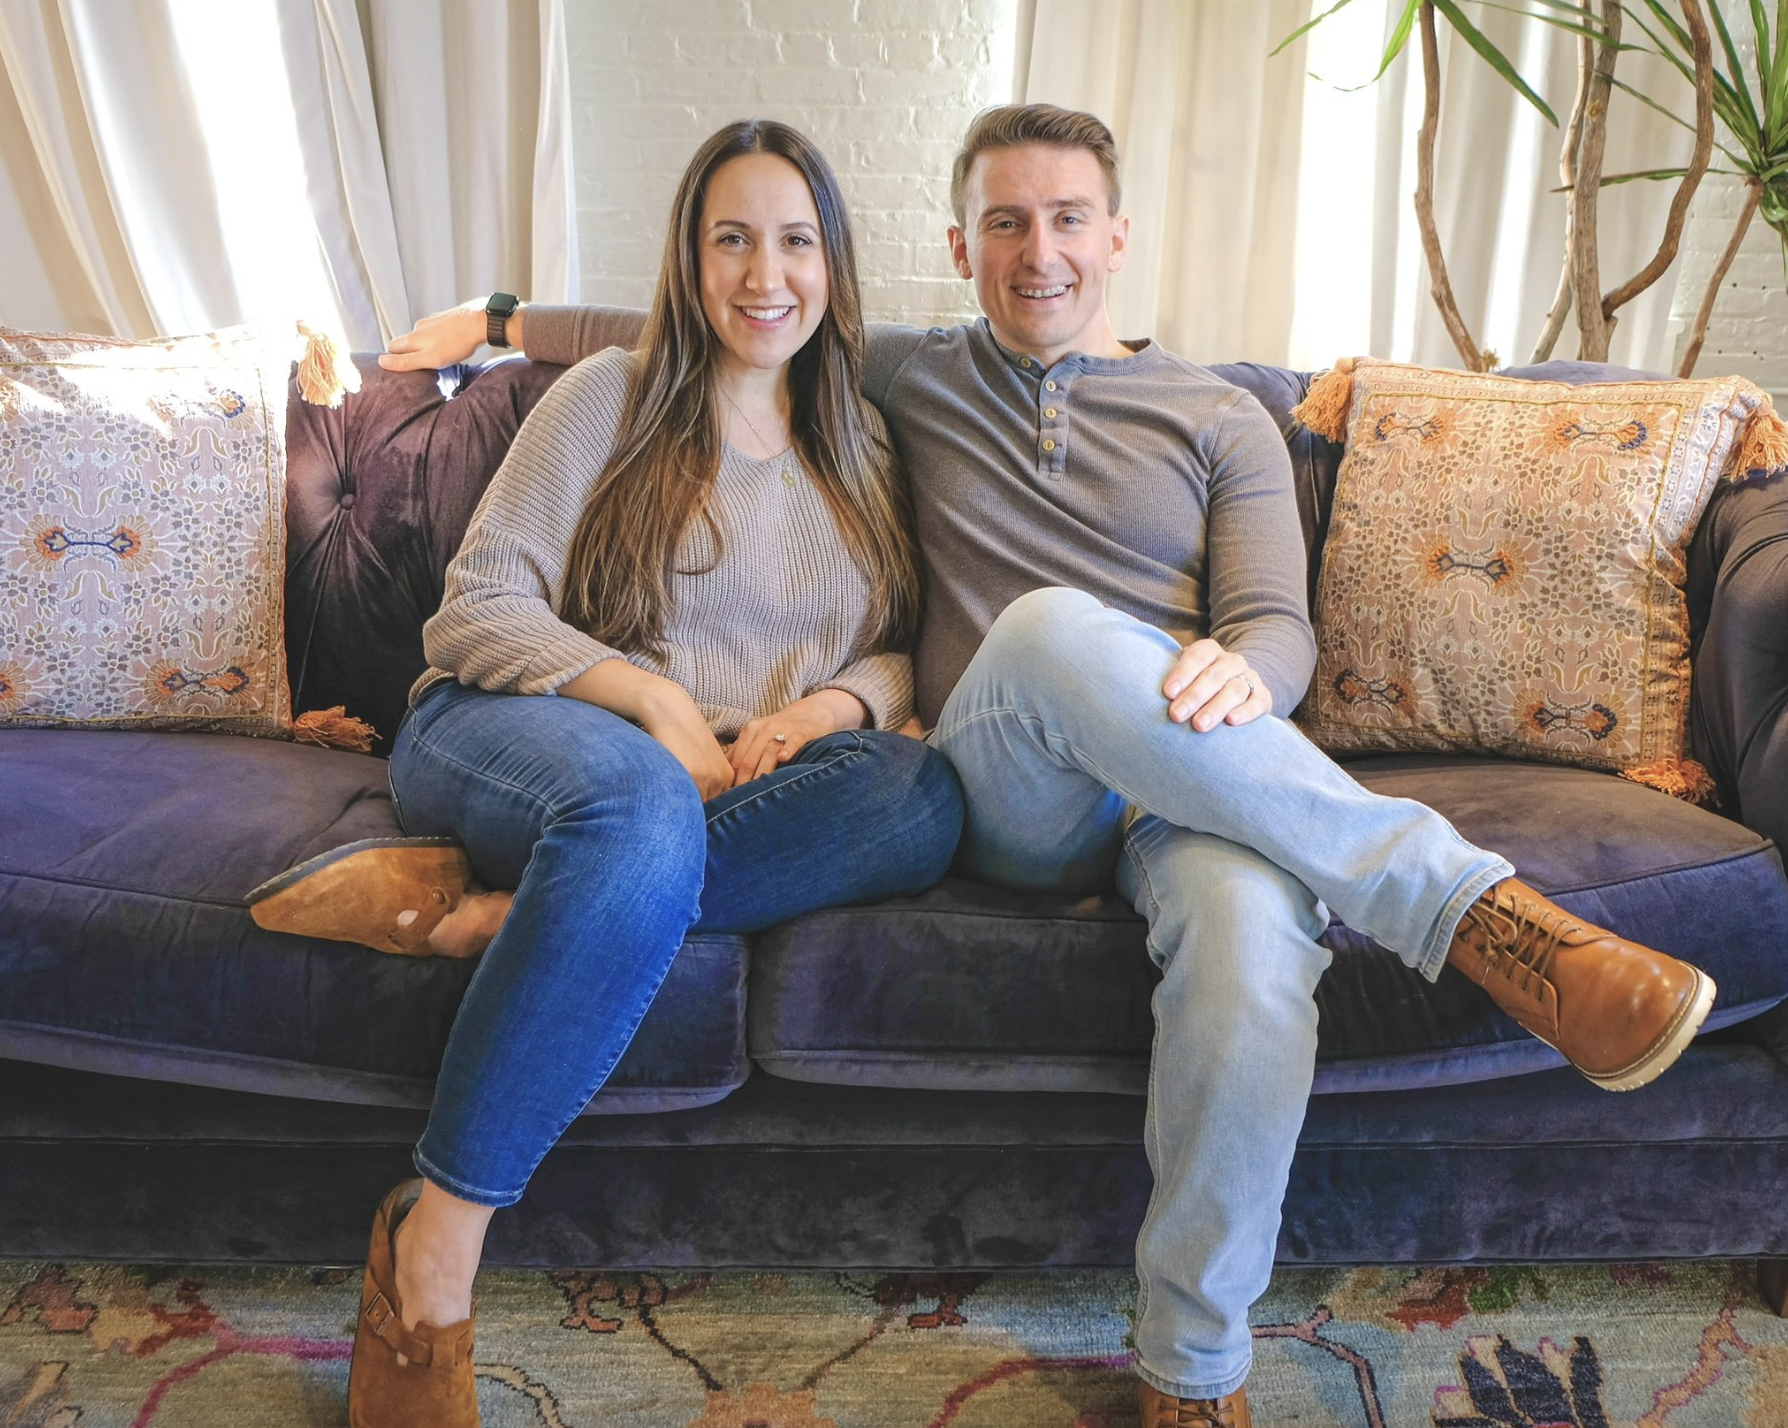 This millennial couple went from being $100K in student loan debt to real estate investors with nearly a dozen apartment rentals valued at $1.35M